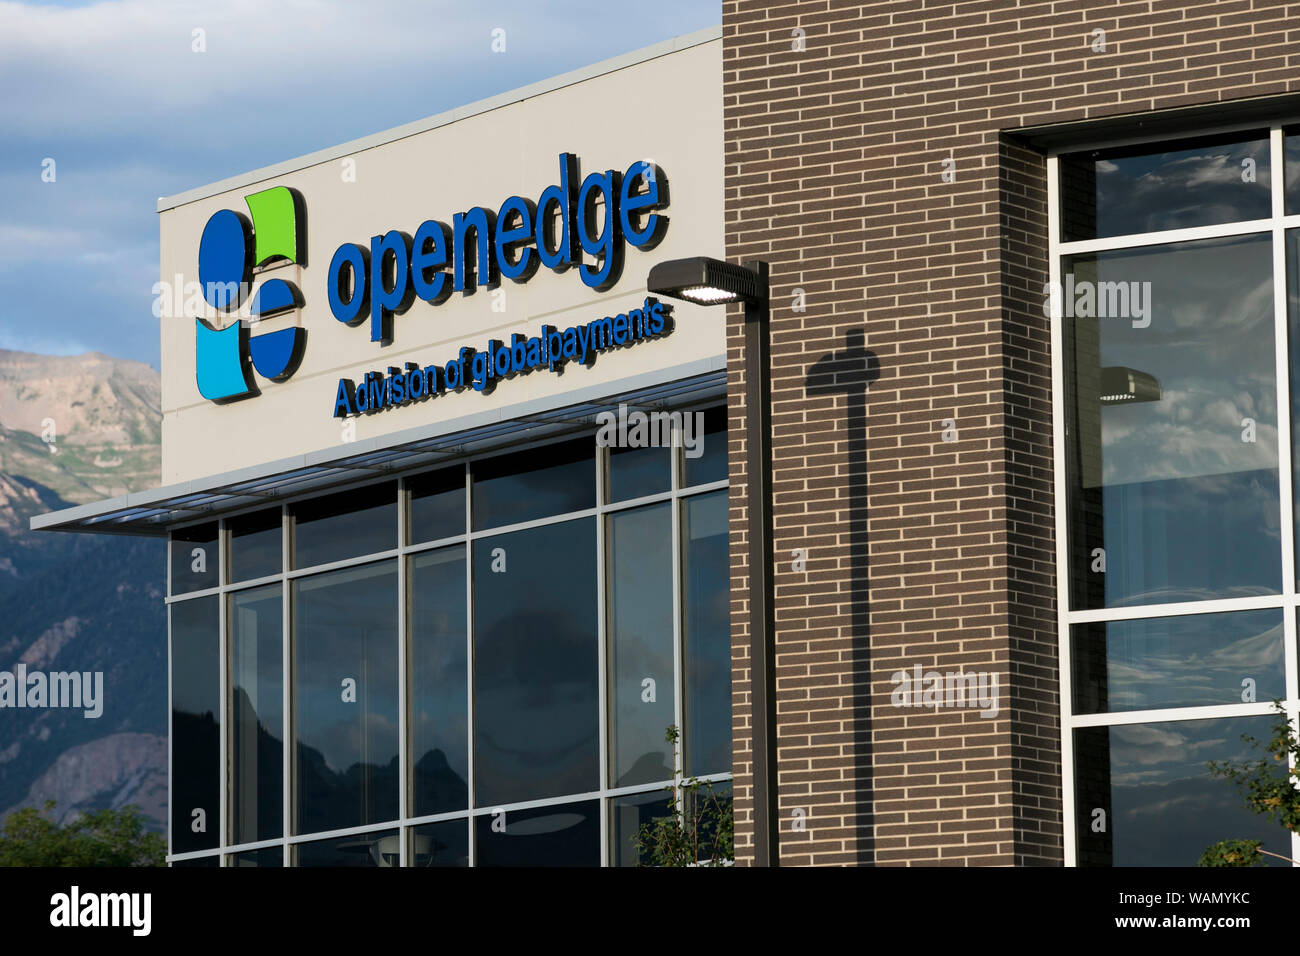 A logo sign outside of the headquarters of OpenEdge Inc., in Lindon, Utah on July 29, 2019. Stock Photo